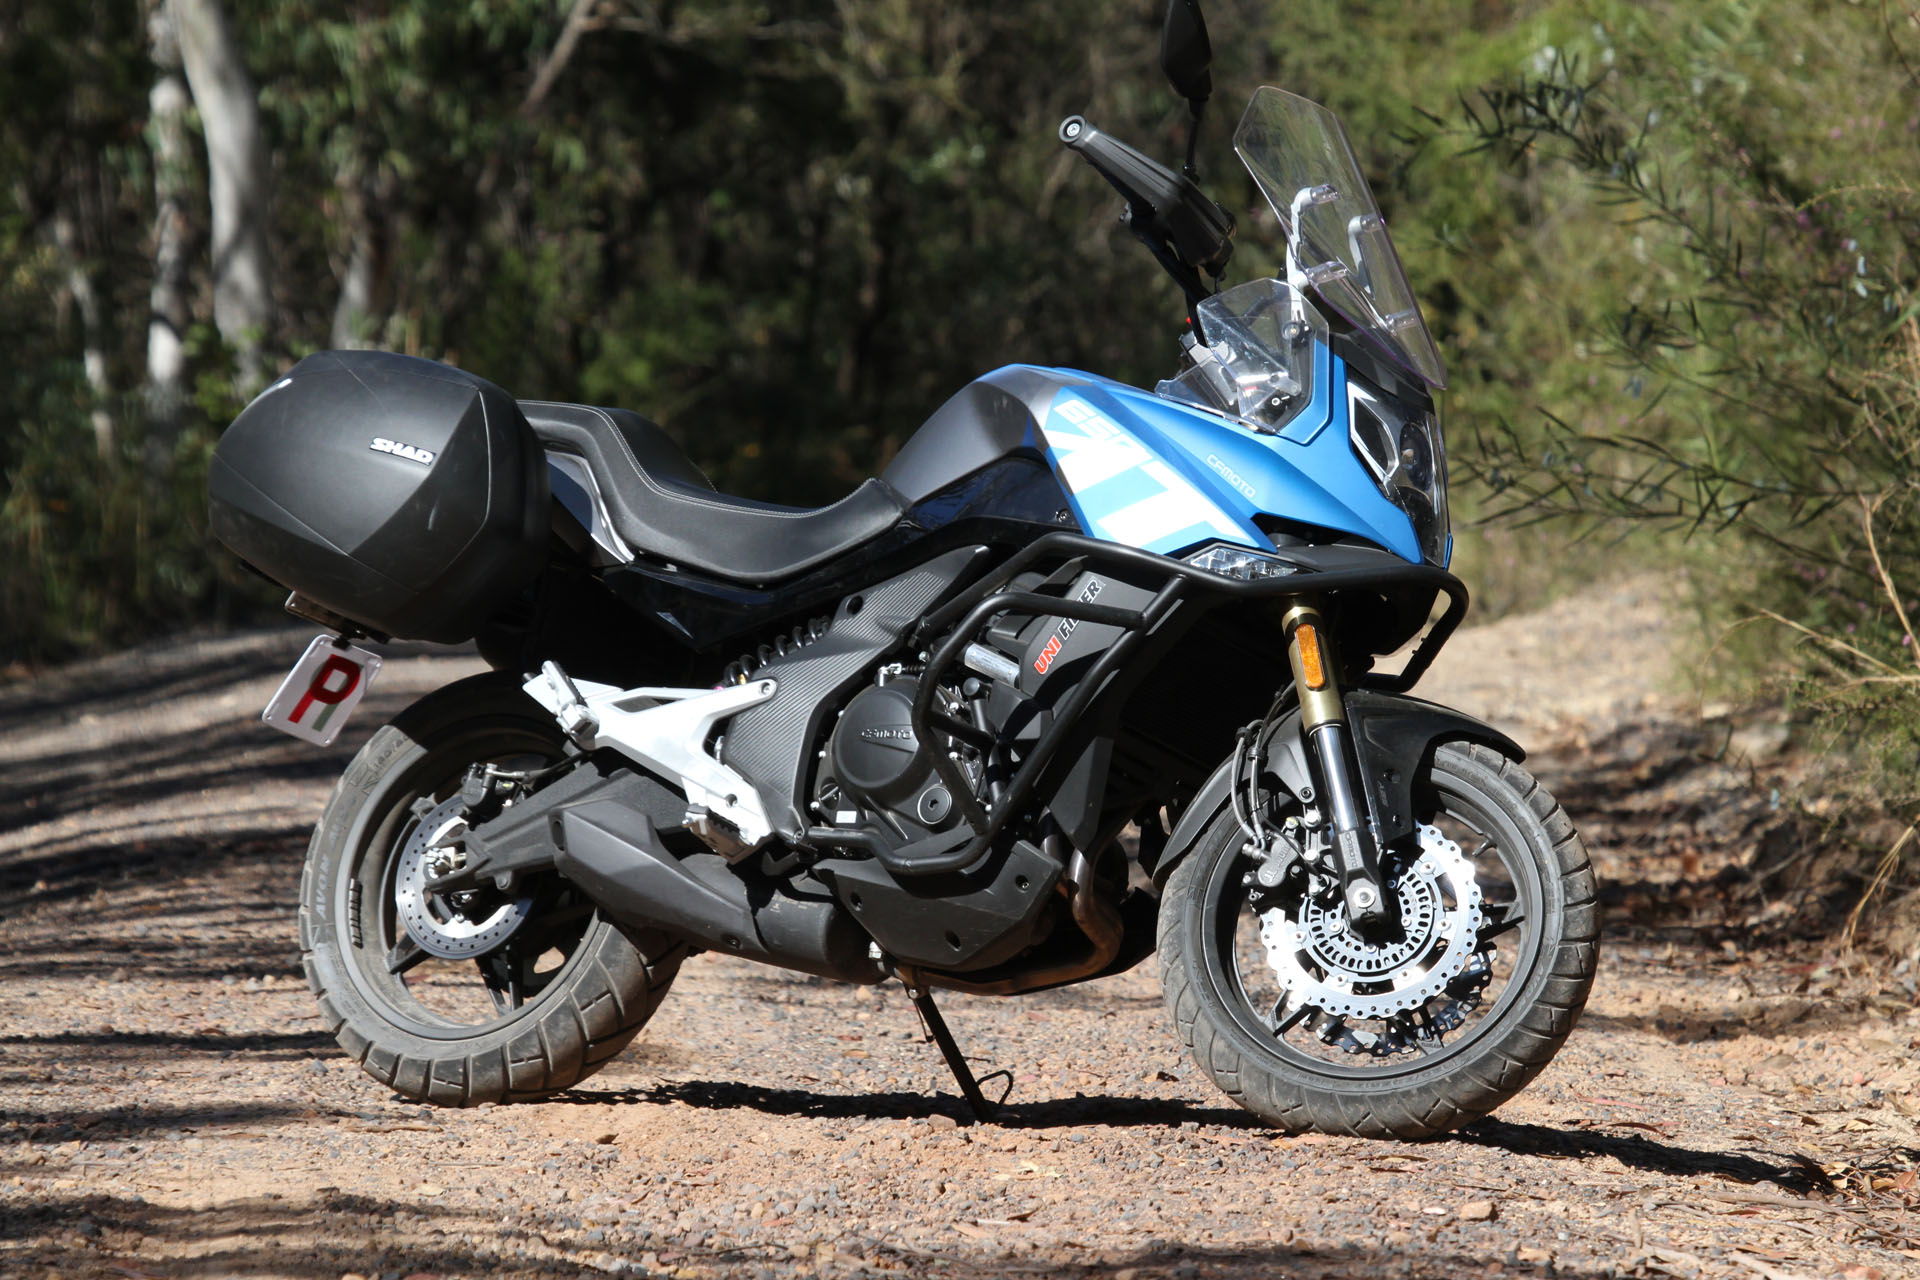 Next came time to see how the CFMOTO 650MT handled the Australian bush...